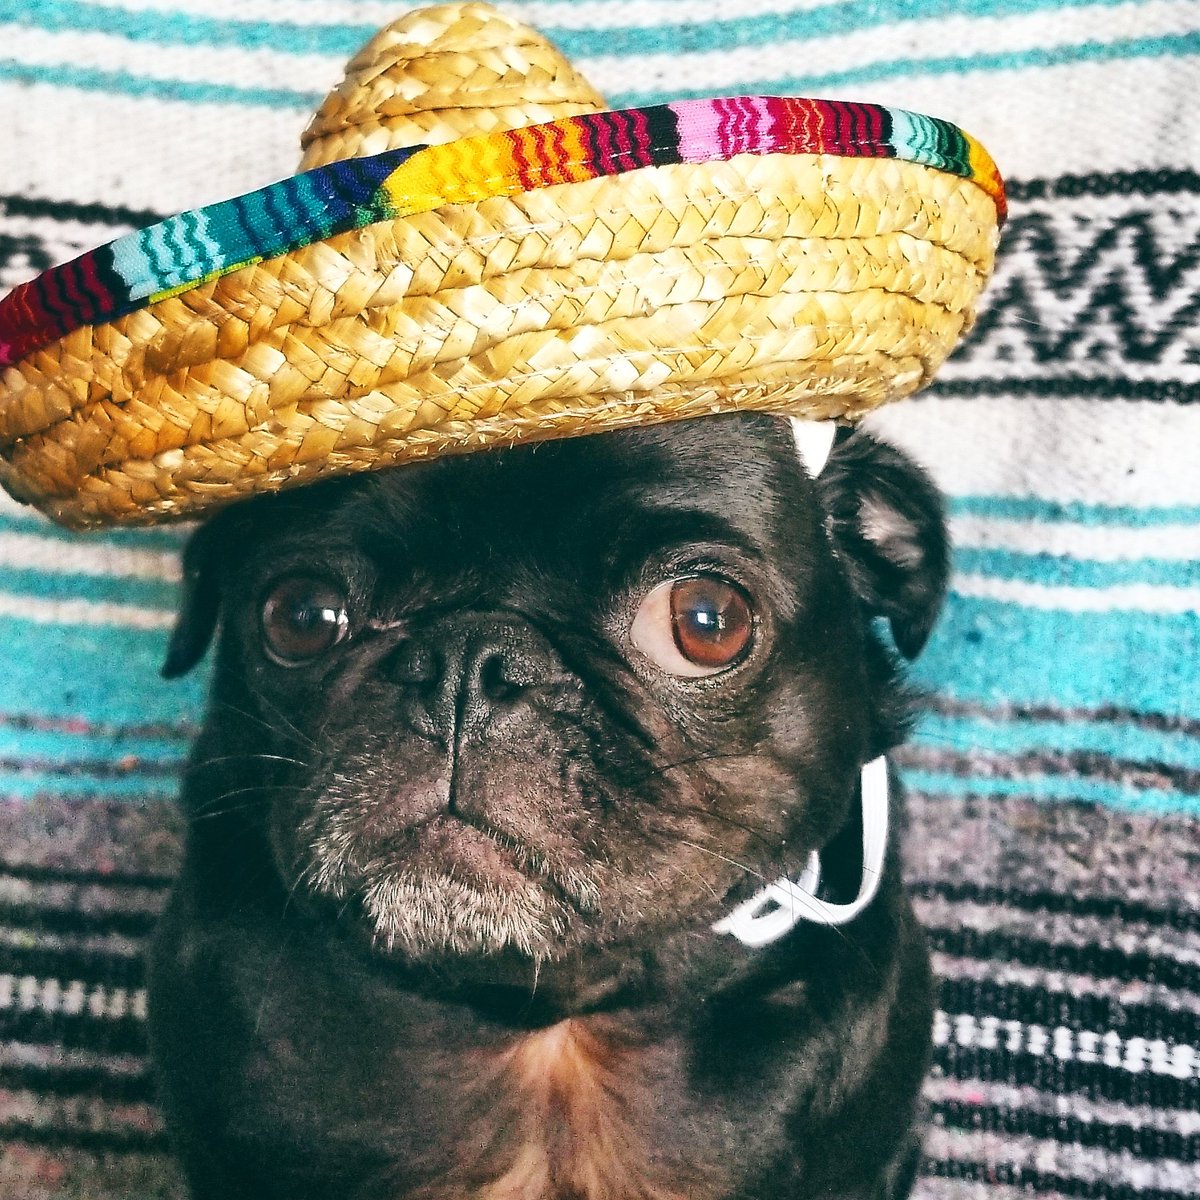 So was that a no to adding chips 'n queso to my hat then??? How about salsa instead? Guac?
Happy Cinco de Mayo! 🎉 🎉 🎉 🎉 🎉 🎉 🎉 🎉 🎉 🎉 🎉

#pug #pugs #dogsoftwitter #dog #dogs #CincoDeMayo #CincoDeMayhem2019 #CincoDeMayoWeekend #scribblepug